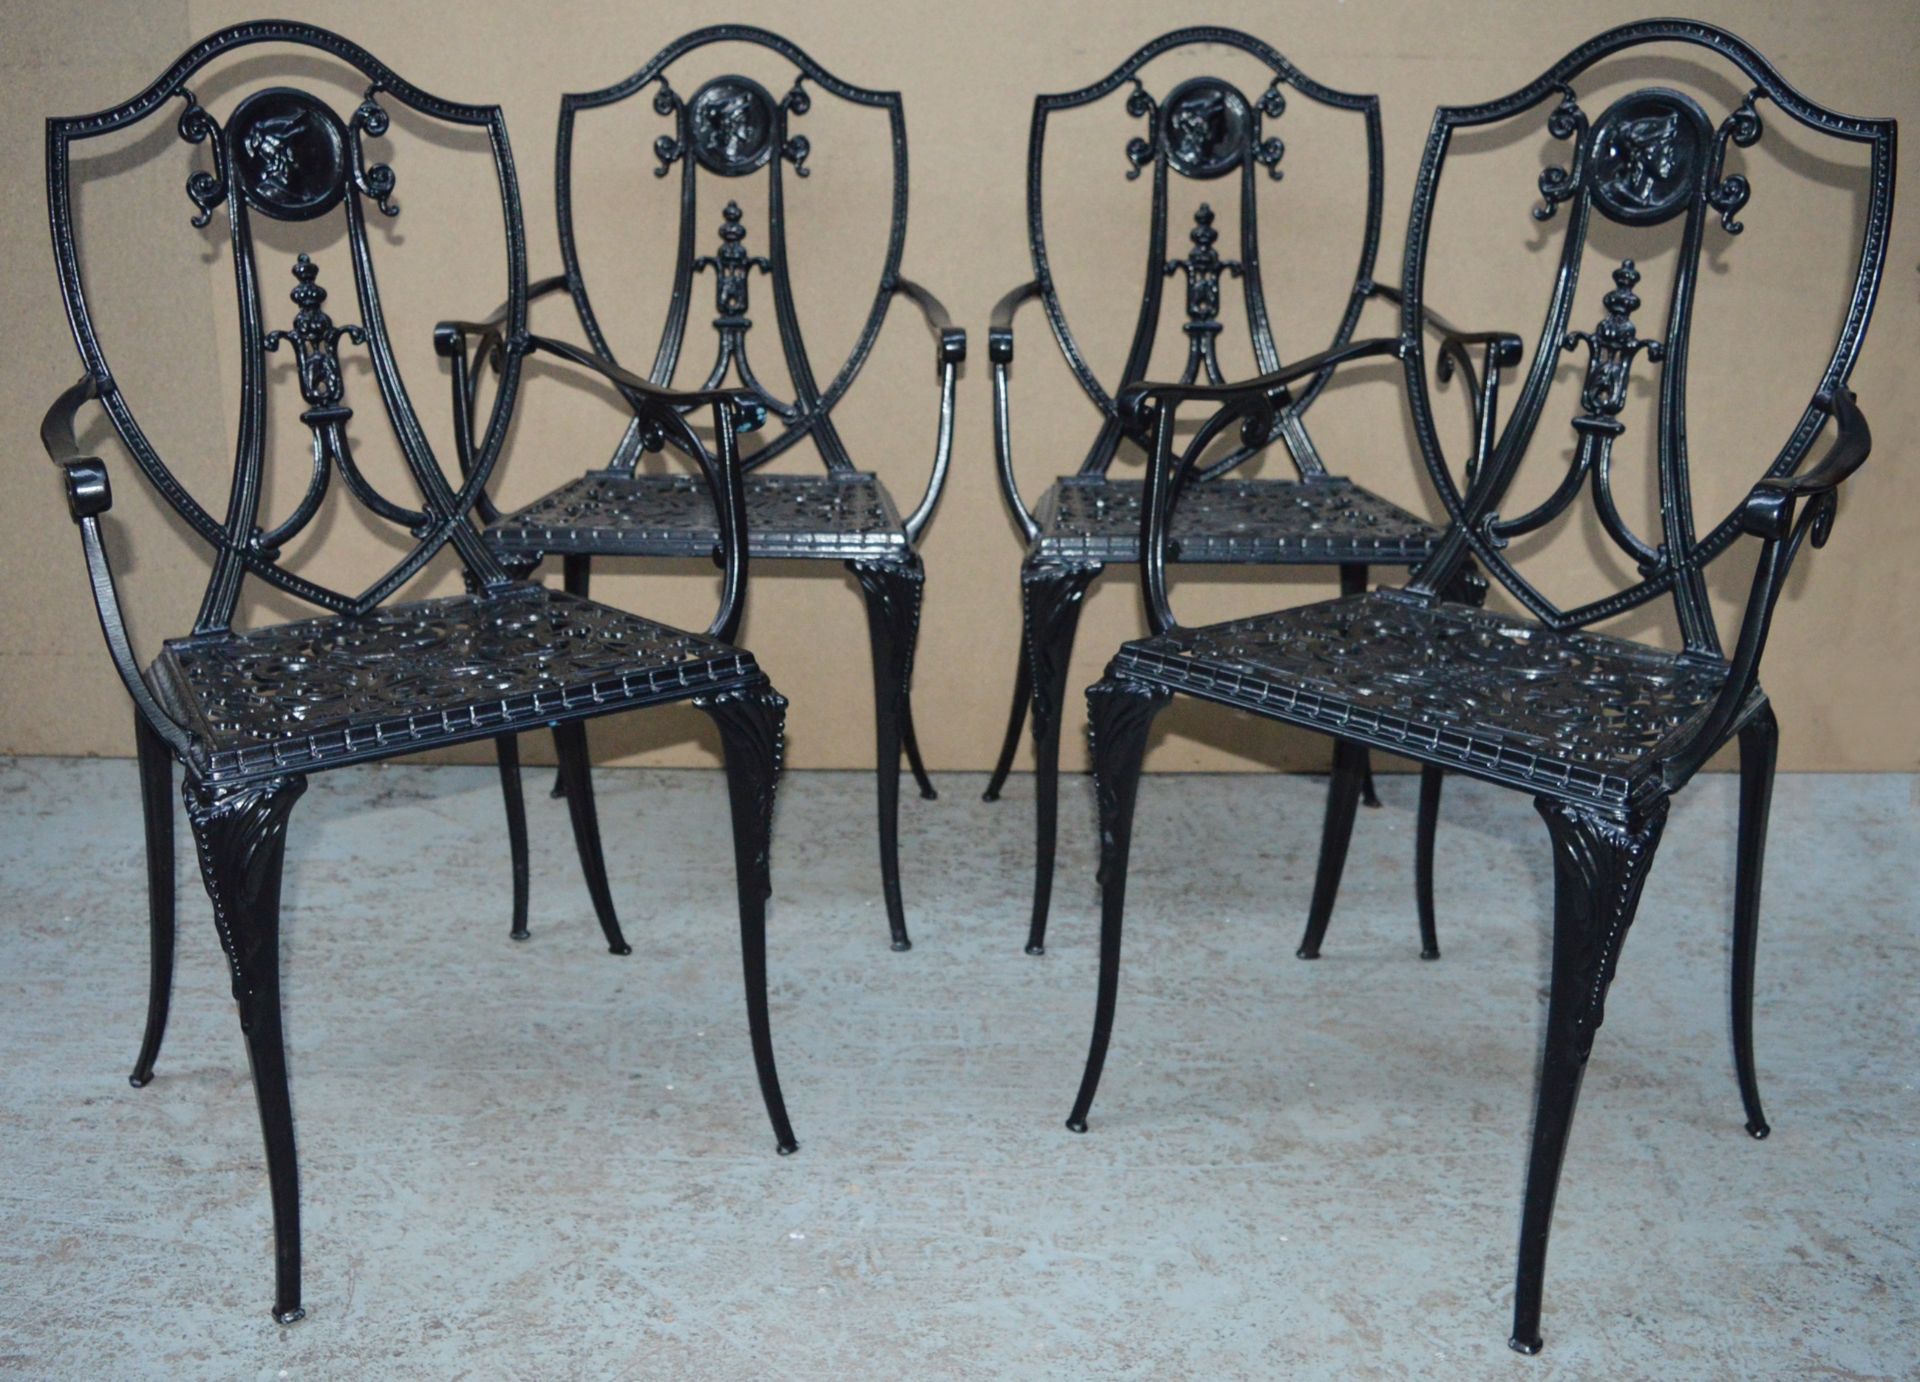 4 x Cast Metal Shield Back Restaurant Chairs - Suitable For Indoor or Outdoor Use - From Famous